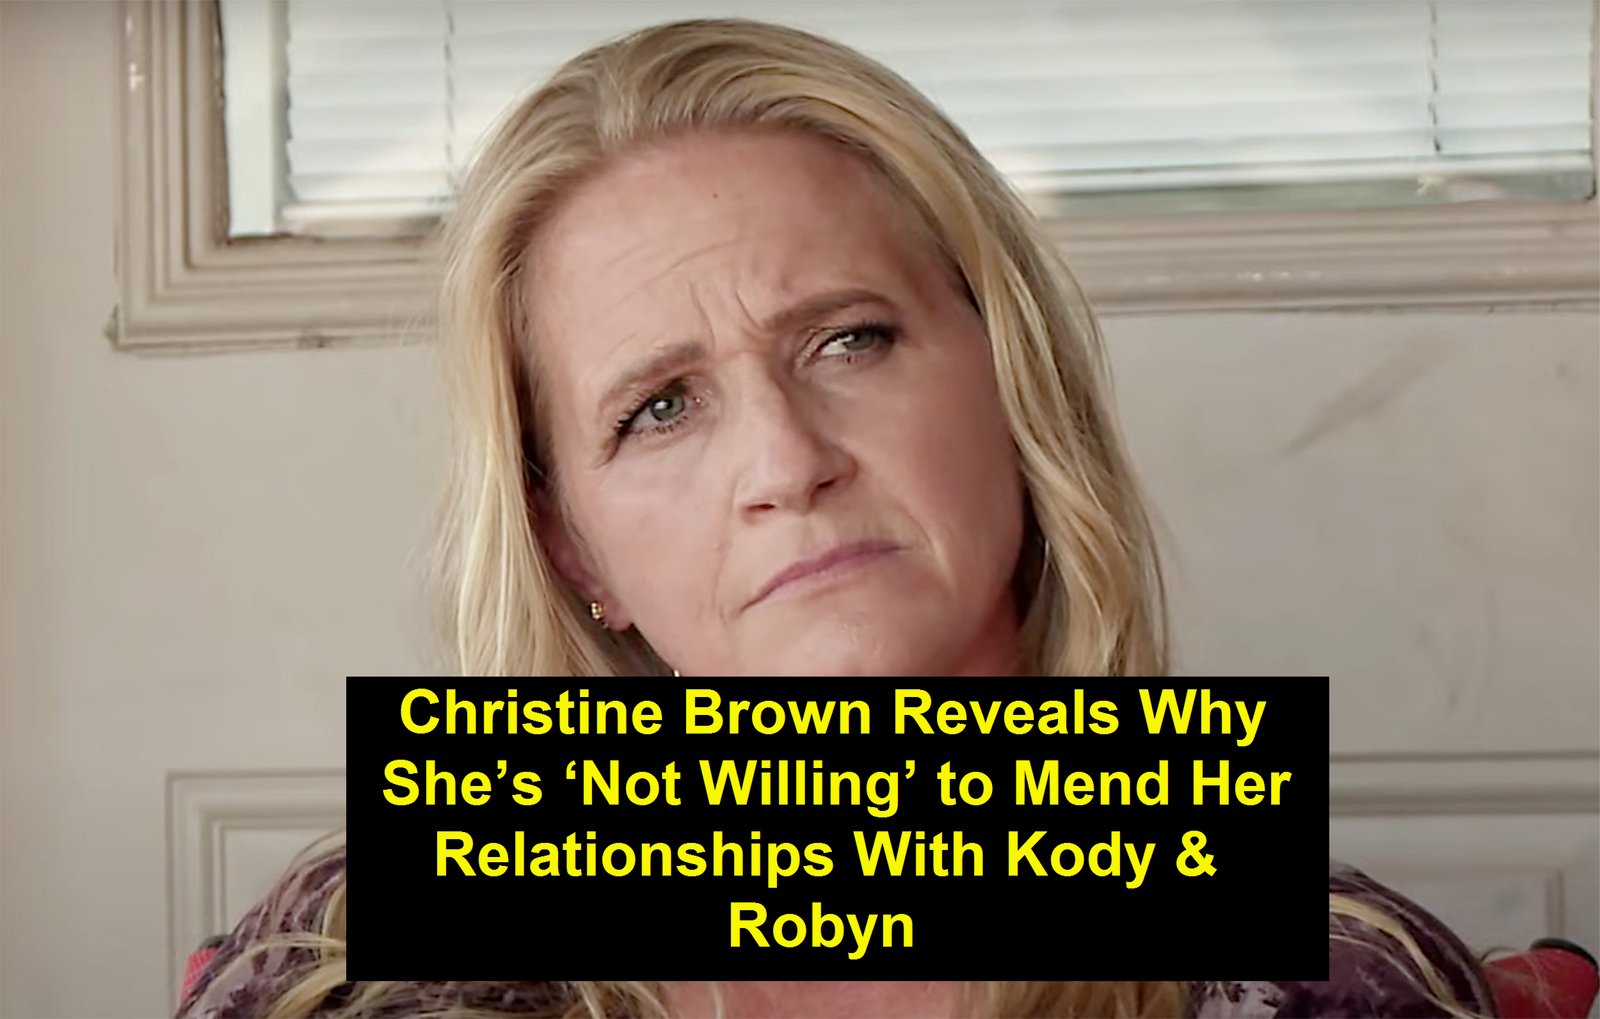 Christine Brown Reveals Why She’s ‘Not Willing’ to Mend Her Relationships With Kody & Robyn